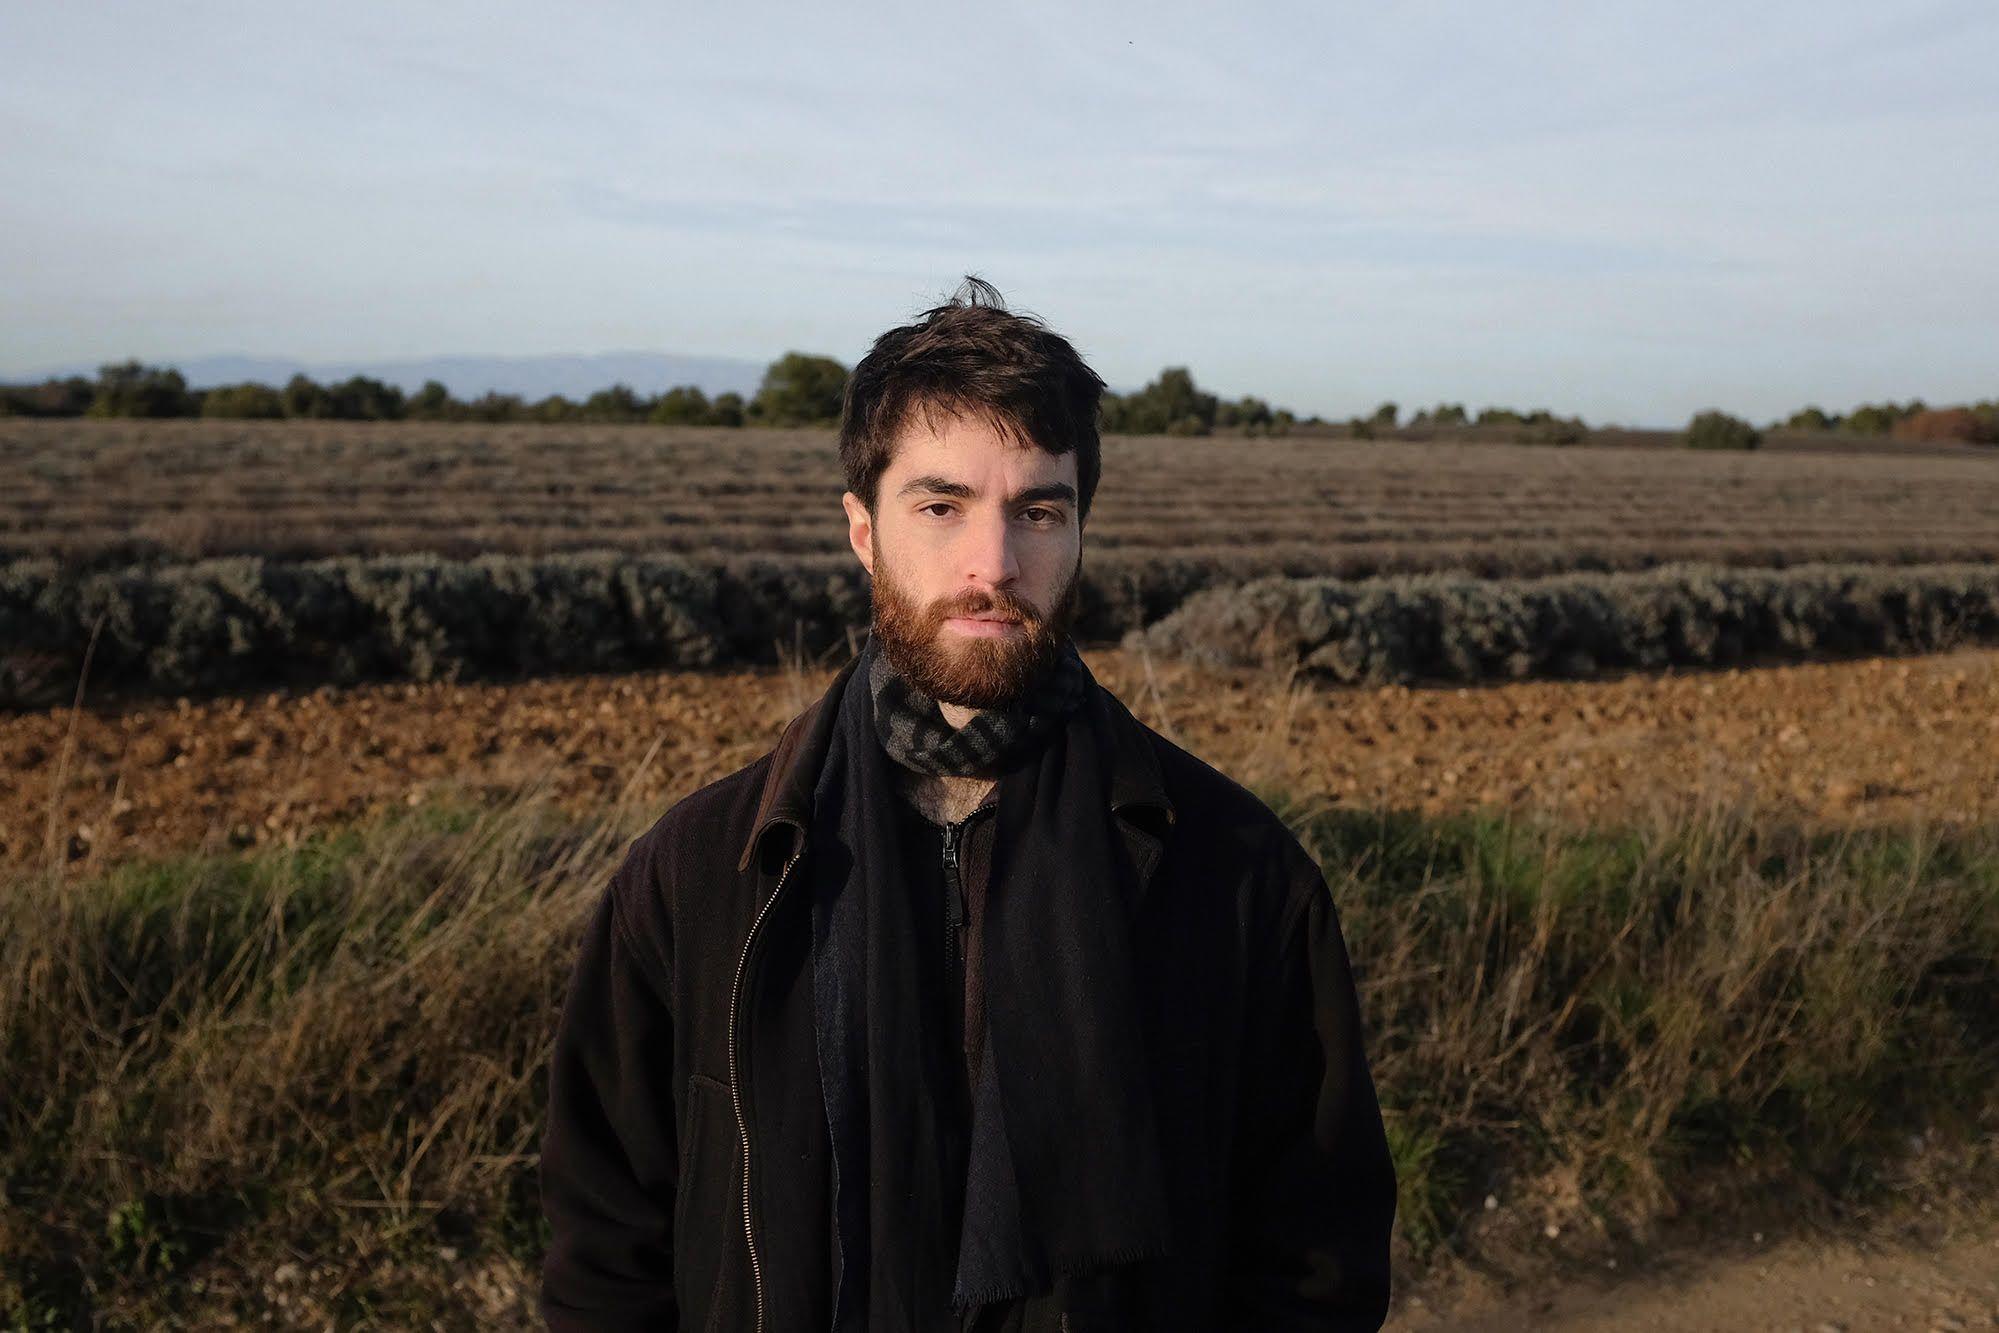 A picture of a man standing in a field. He has dark hair and a beard, he wears a scarve and a coat. The sky is cloudy.